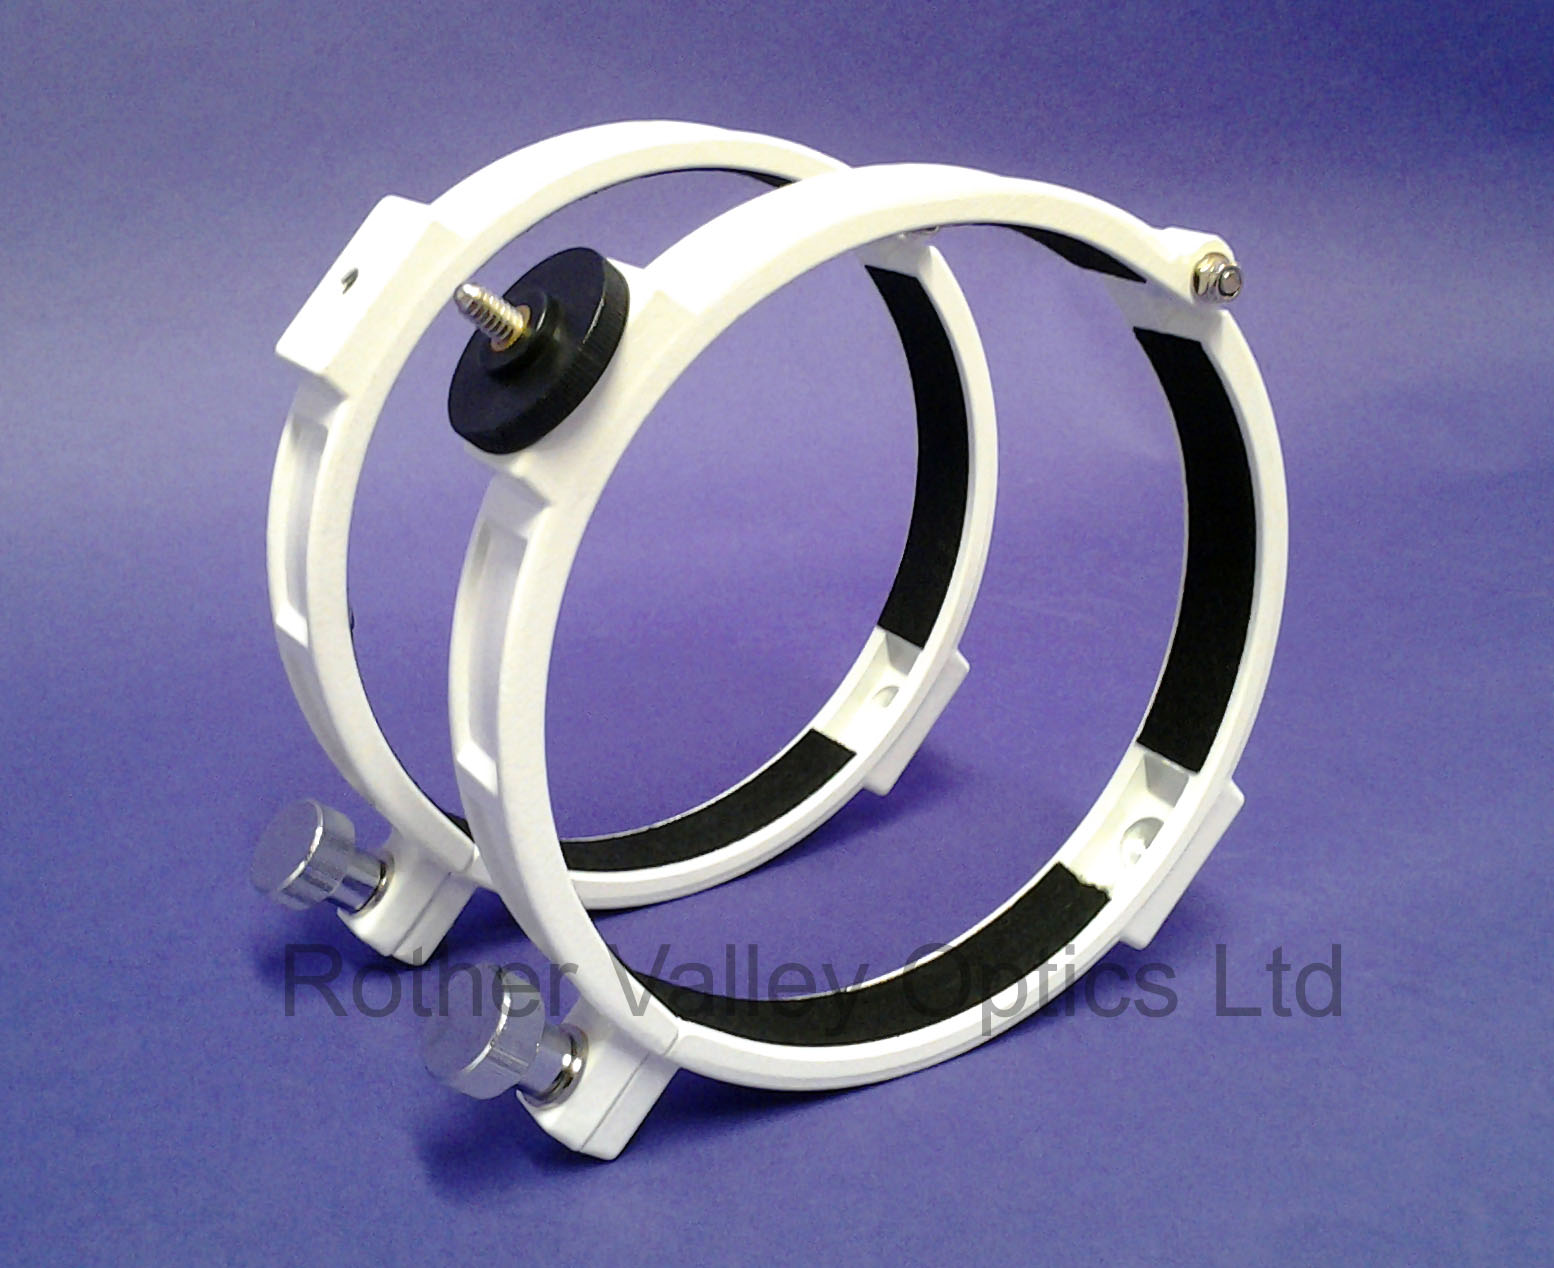 SkyWatcher Tube Ring Set - Rother Valley Optics Ltd 120 Mm Telescope Tube Mounting Rings